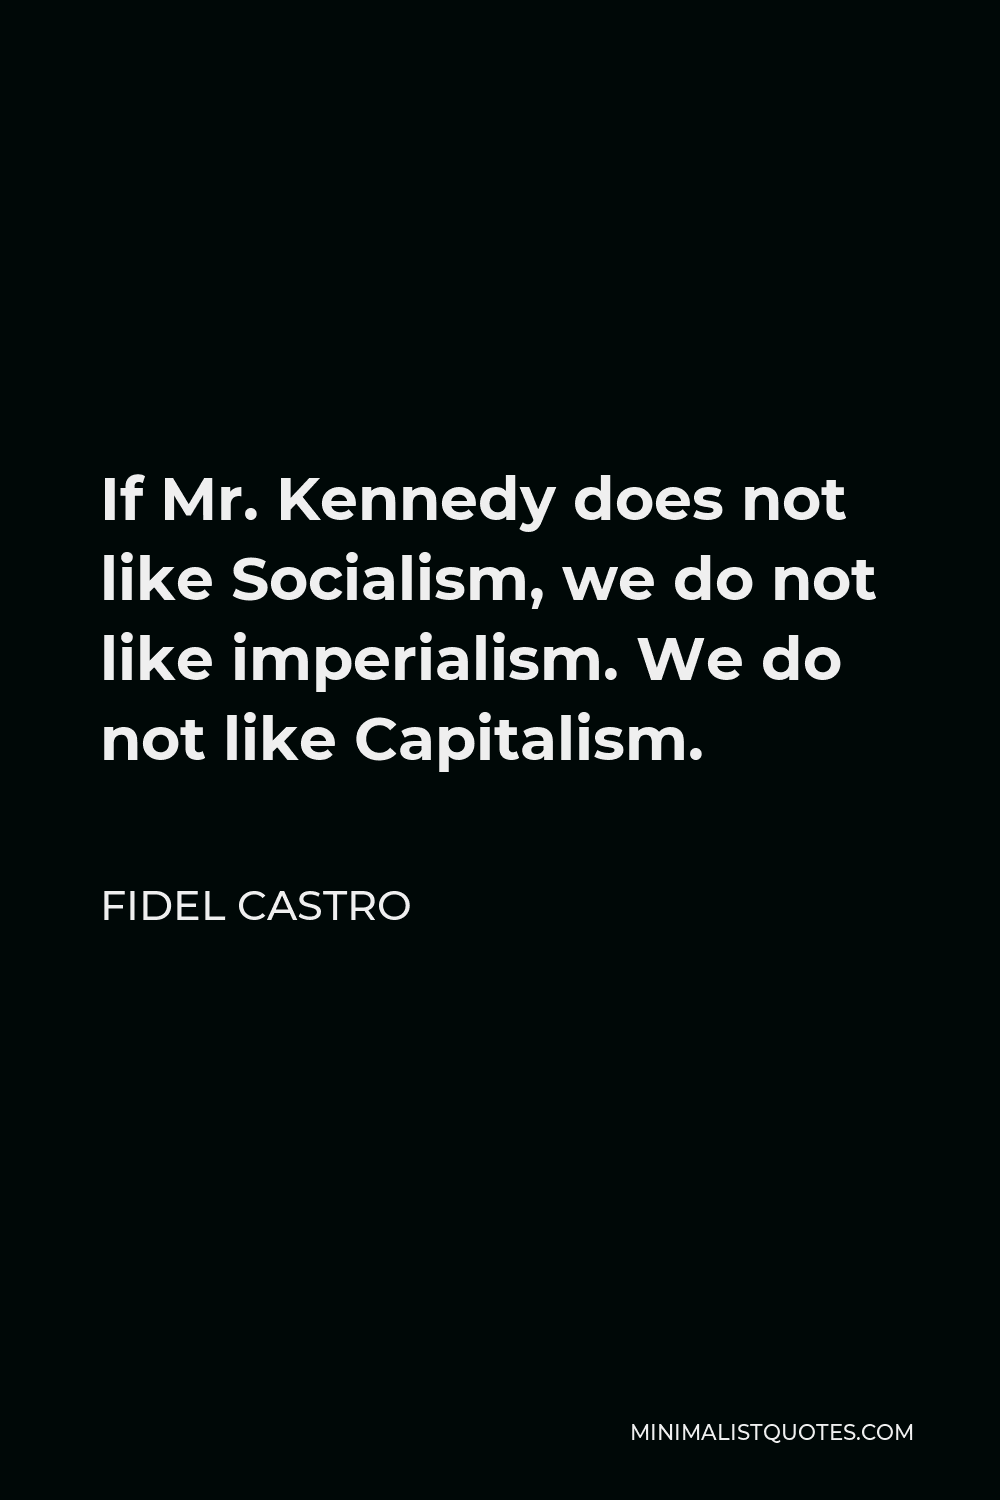 Fidel Castro Quote - If Mr. Kennedy does not like Socialism, we do not like imperialism. We do not like Capitalism.